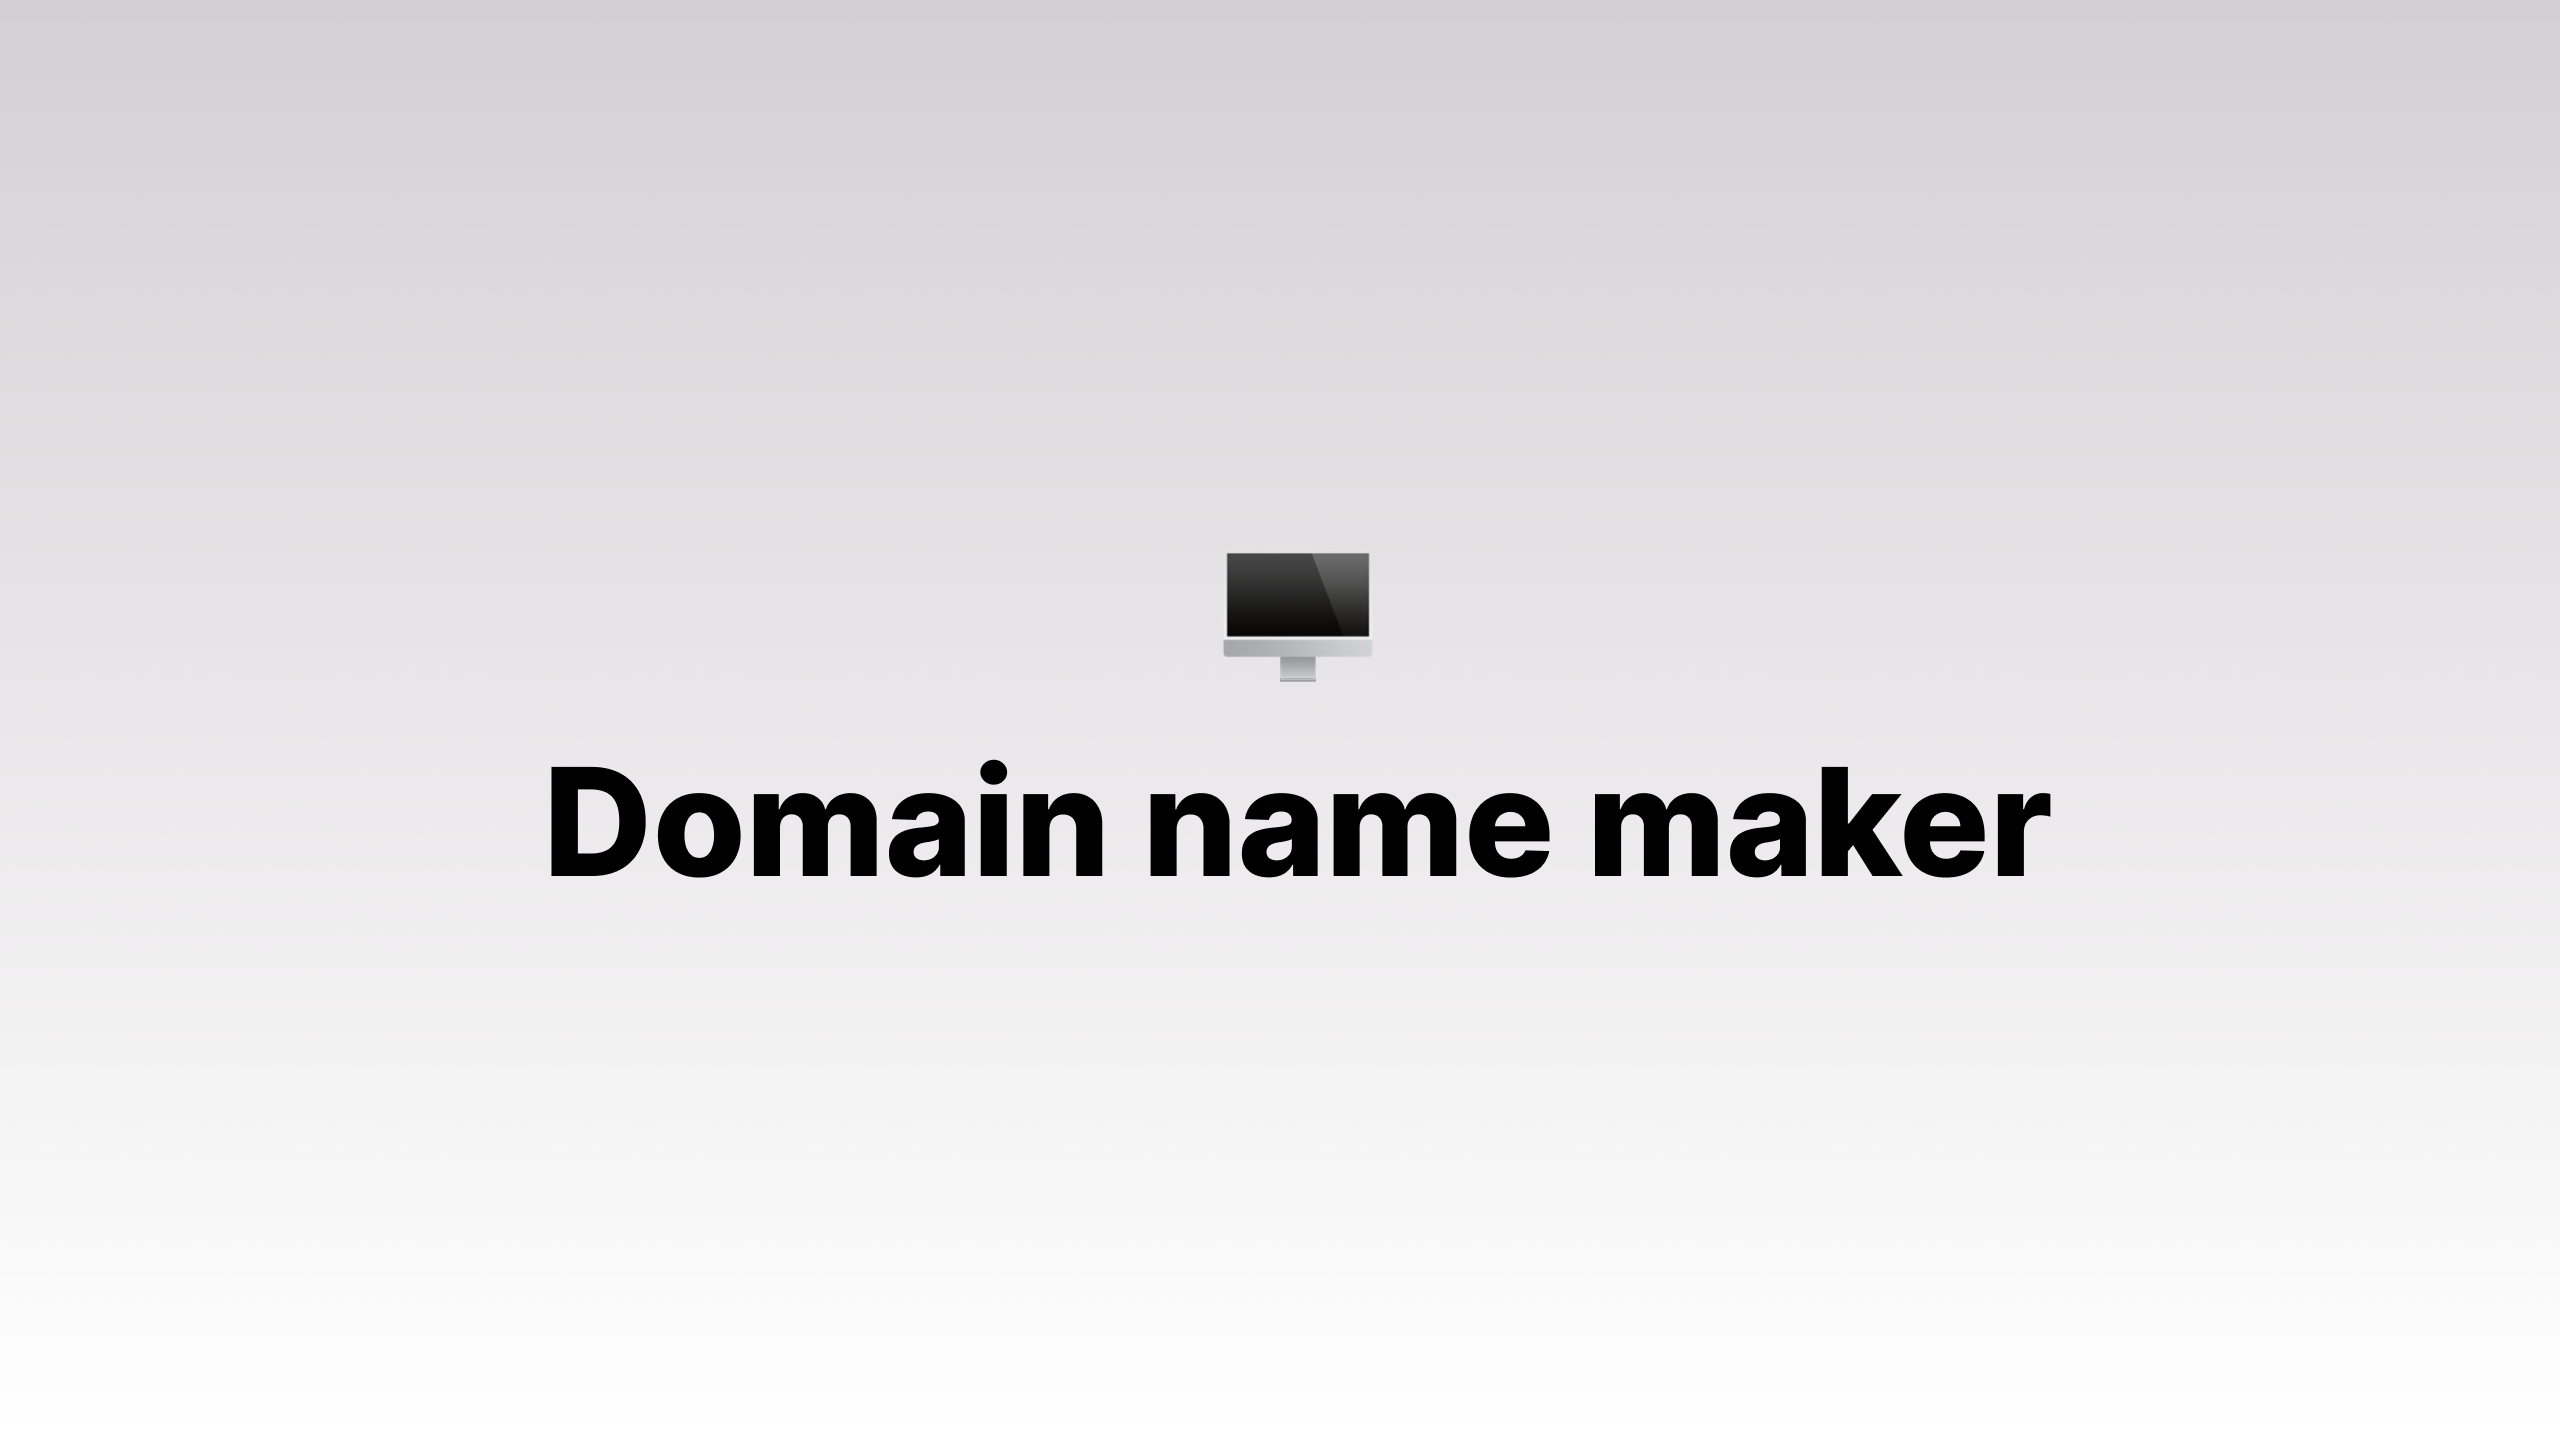 Domain name maker: Create Cool Domain Names for Your Business.